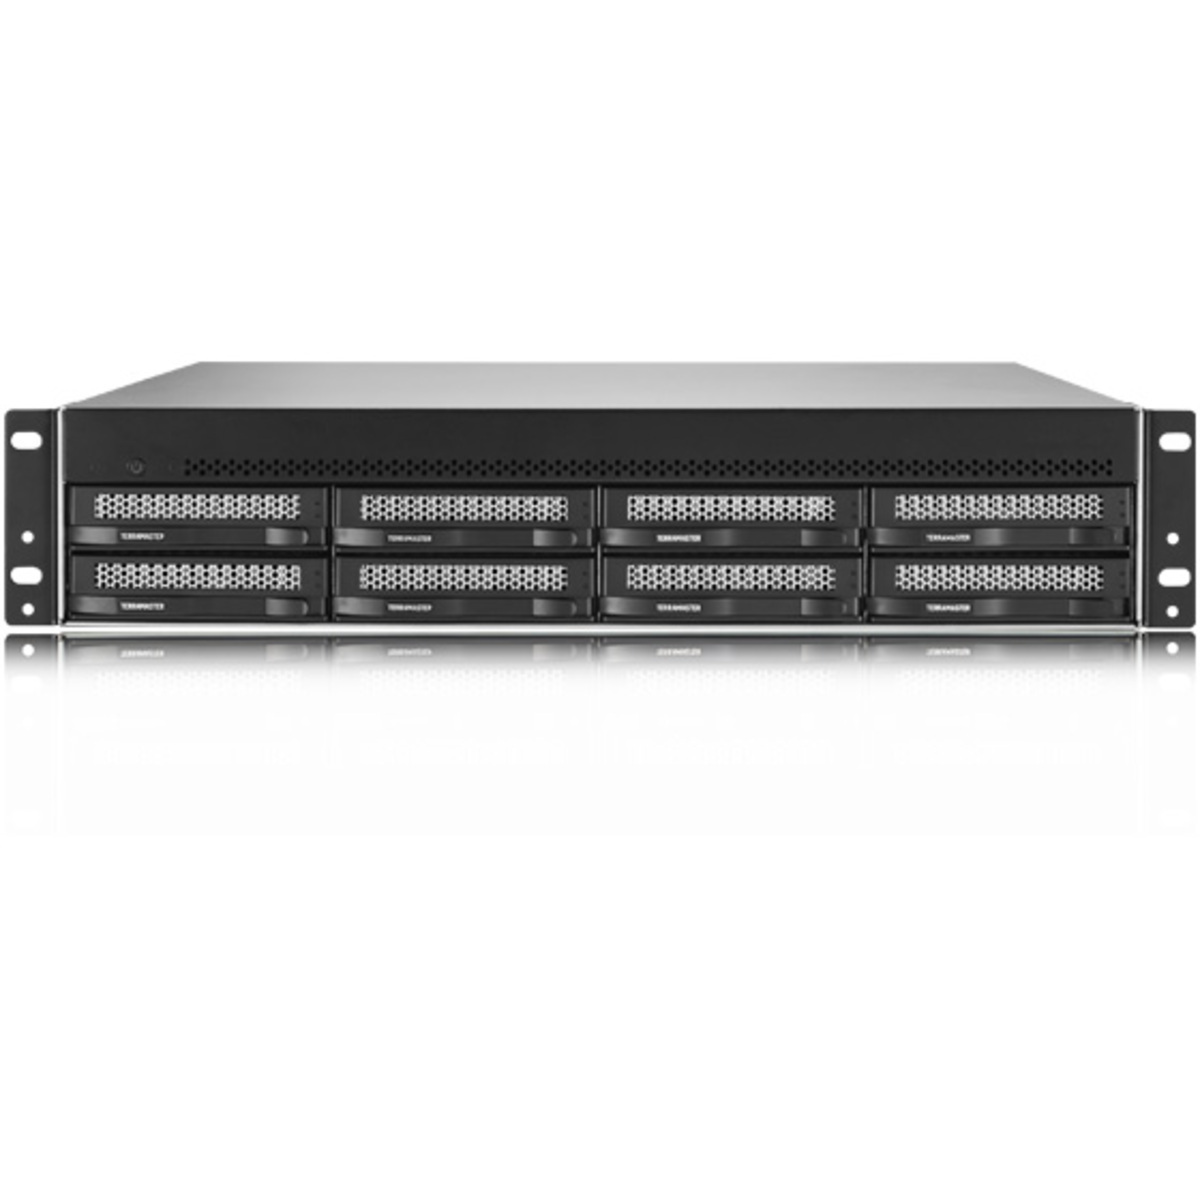 TerraMaster U8-450 80tb 8-Bay RackMount Multimedia / Power User / Business NAS - Network Attached Storage Device 8x10tb Seagate IronWolf ST10000VN000 3.5 7200rpm SATA 6Gb/s HDD NAS Class Drives Installed - Burn-In Tested U8-450